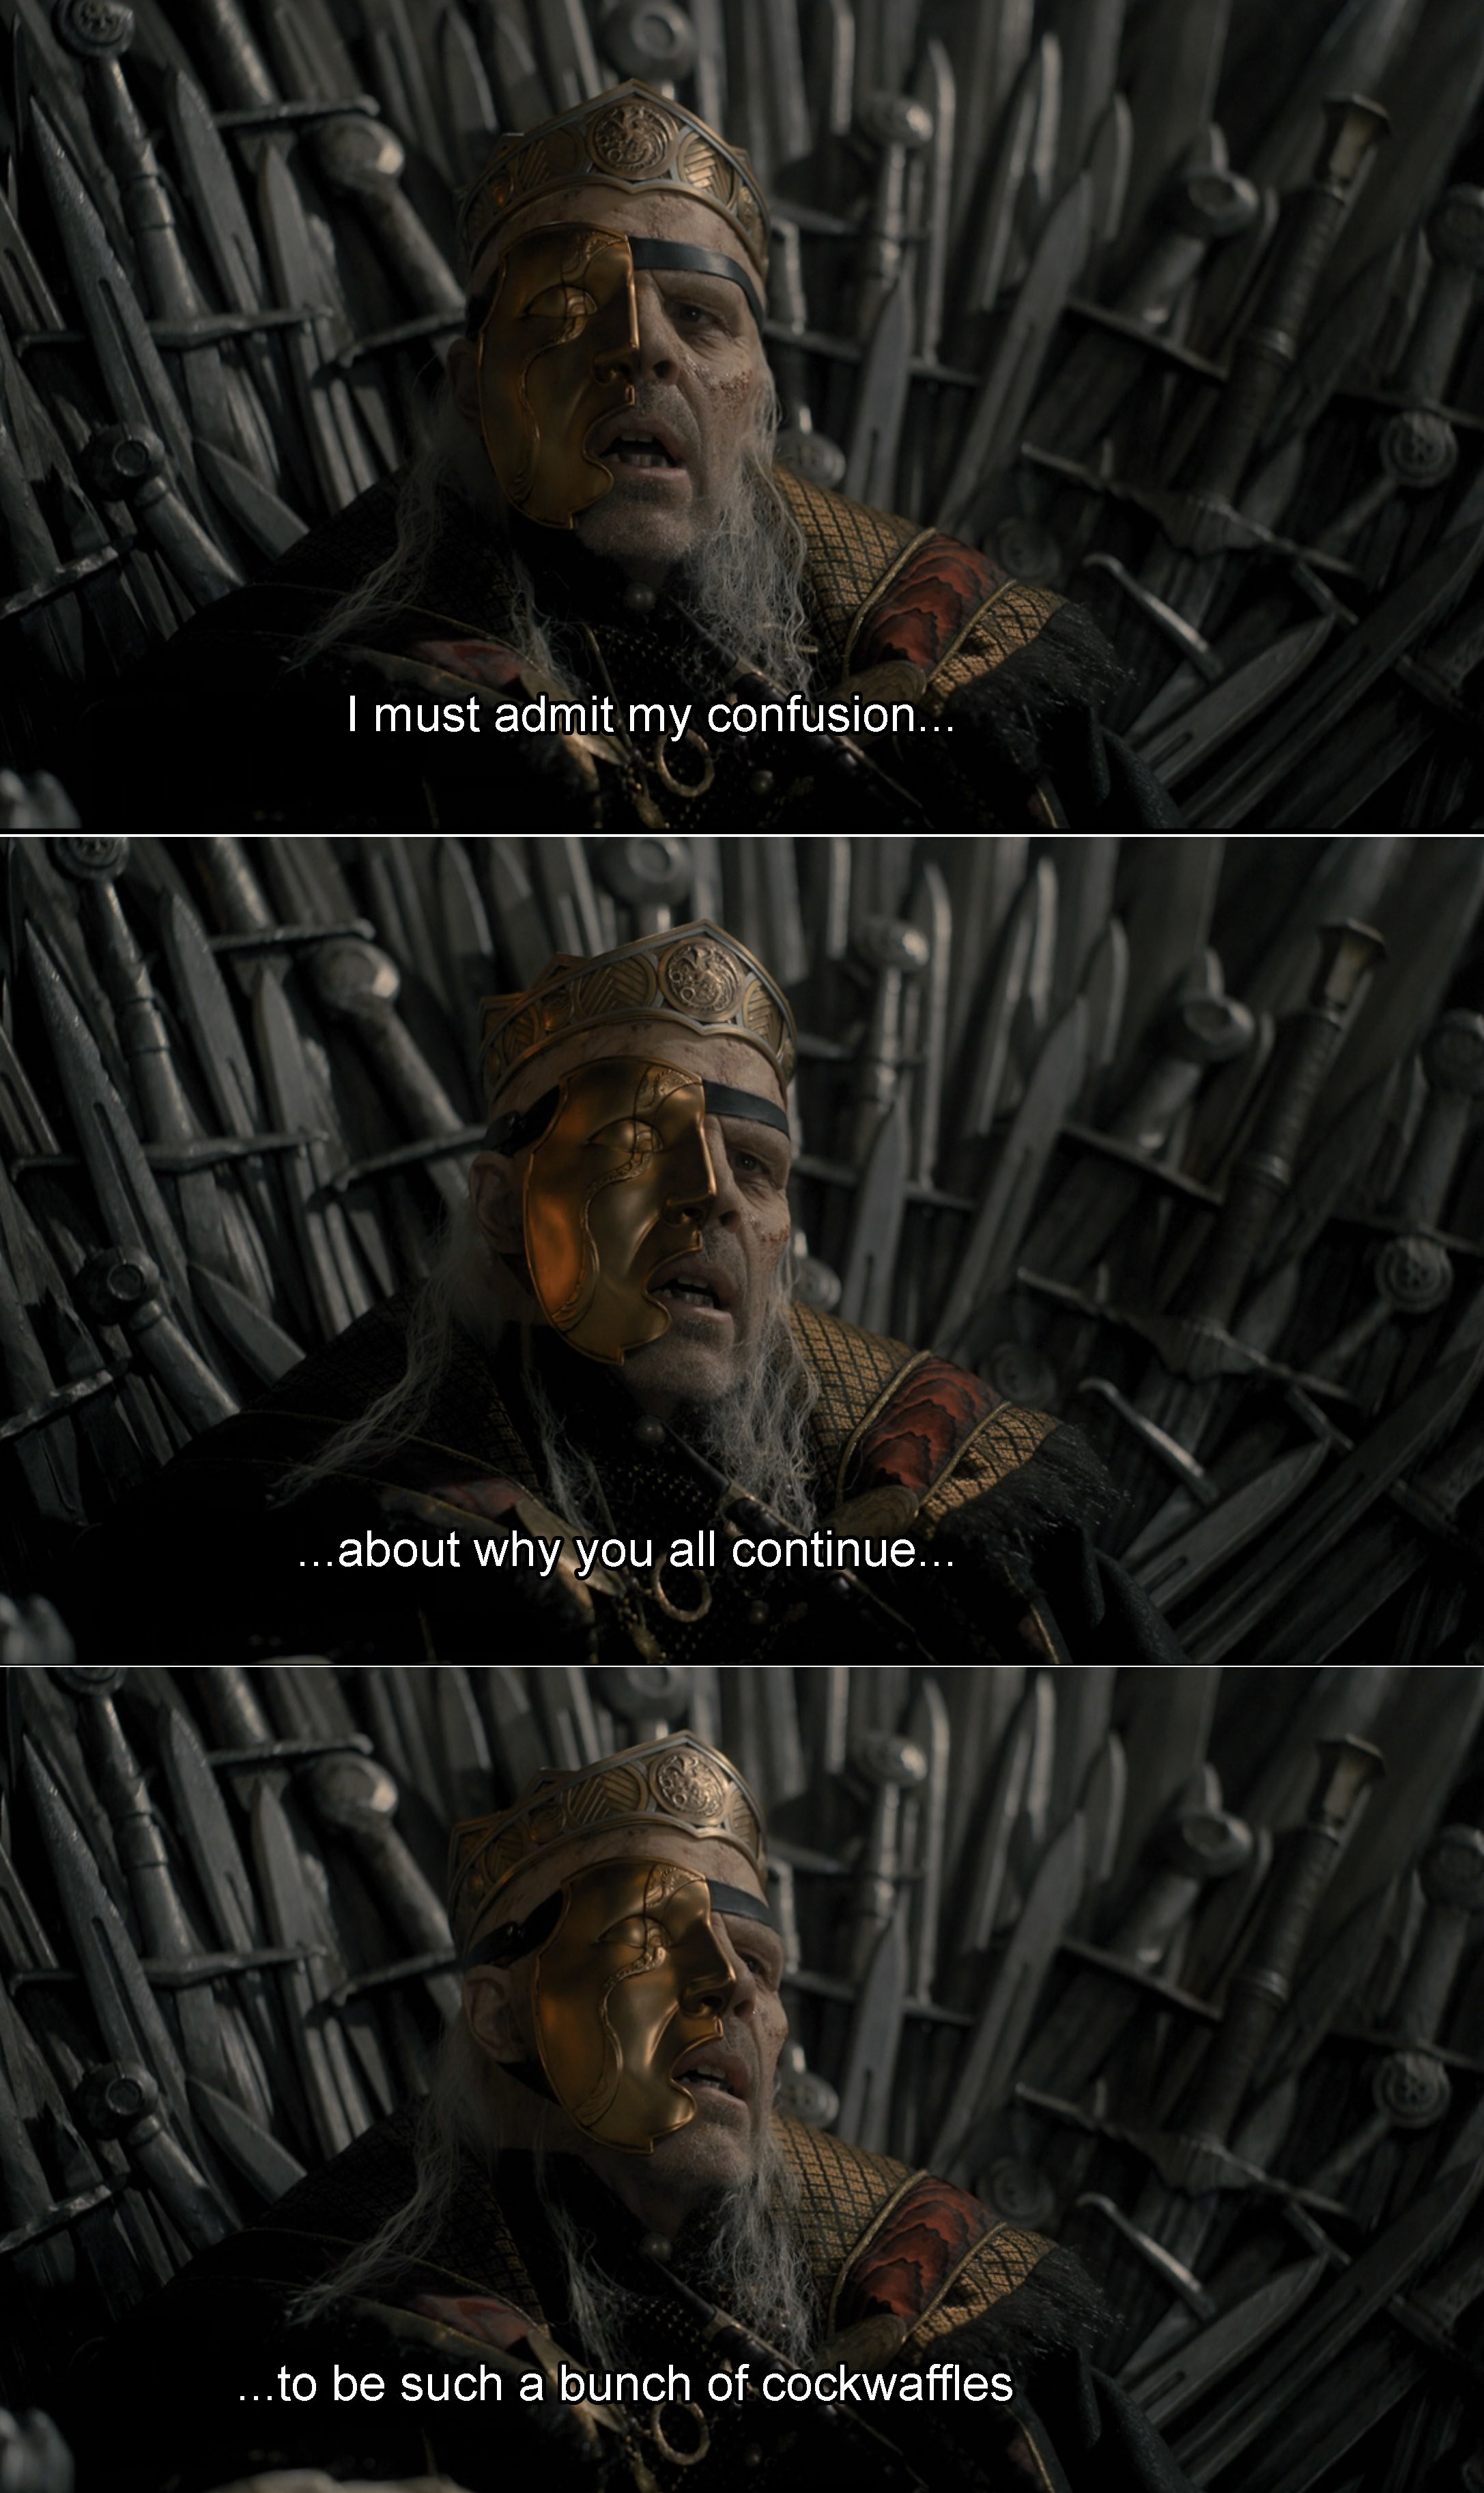 Viserys on the throne with fake dialogue that says &quot;I must admit my confusion about why you all continue to be such a bunch of cockwaffles&quot;